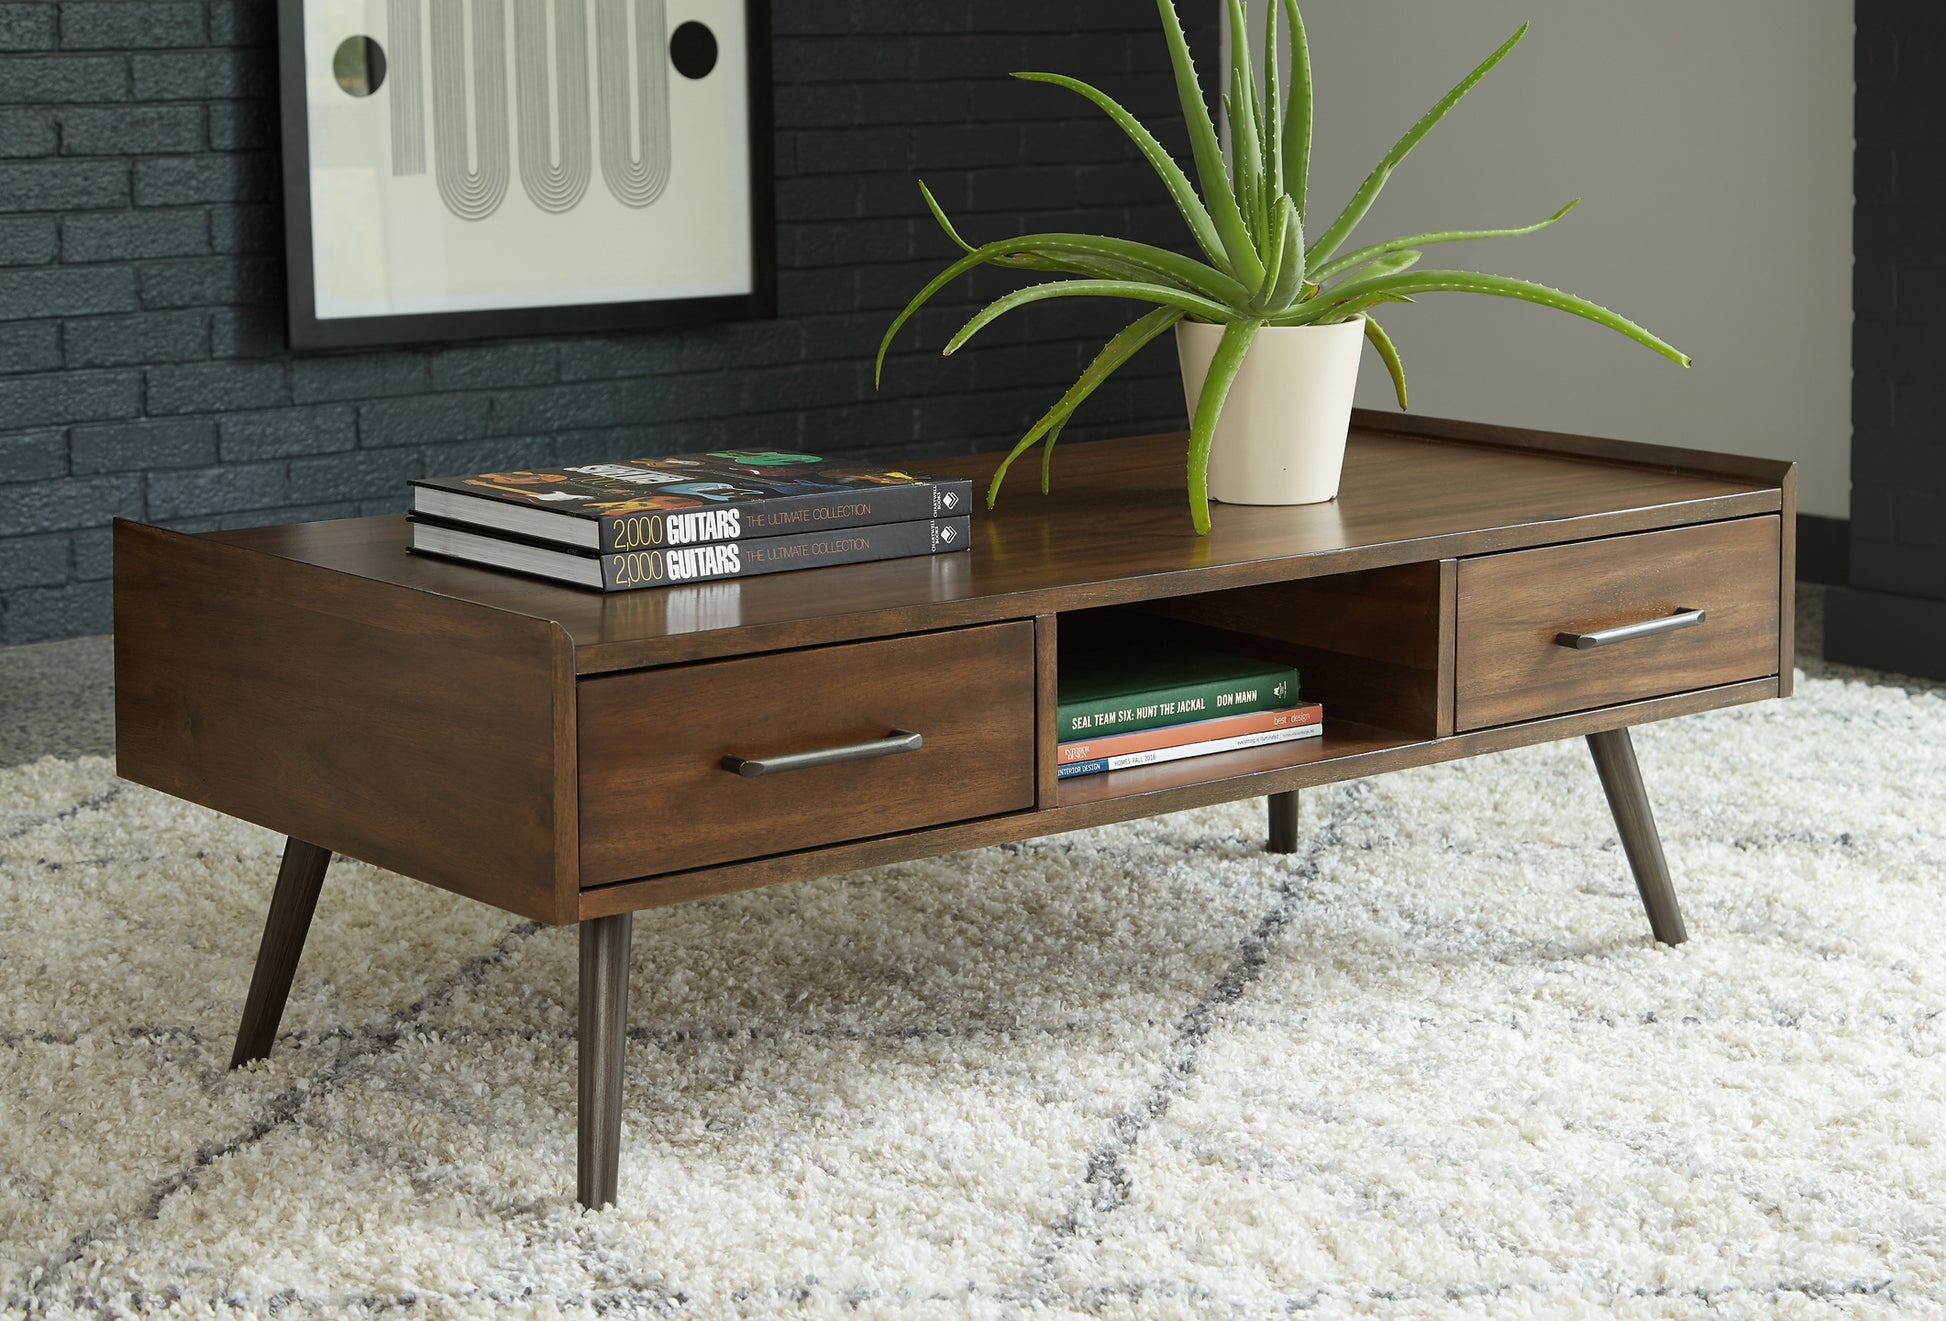 Calmoni Coffee Table with 2 End Tables Wilson Furniture (OH)  in Bridgeport, Ohio. Serving Bridgeport, Yorkville, Bellaire, & Avondale